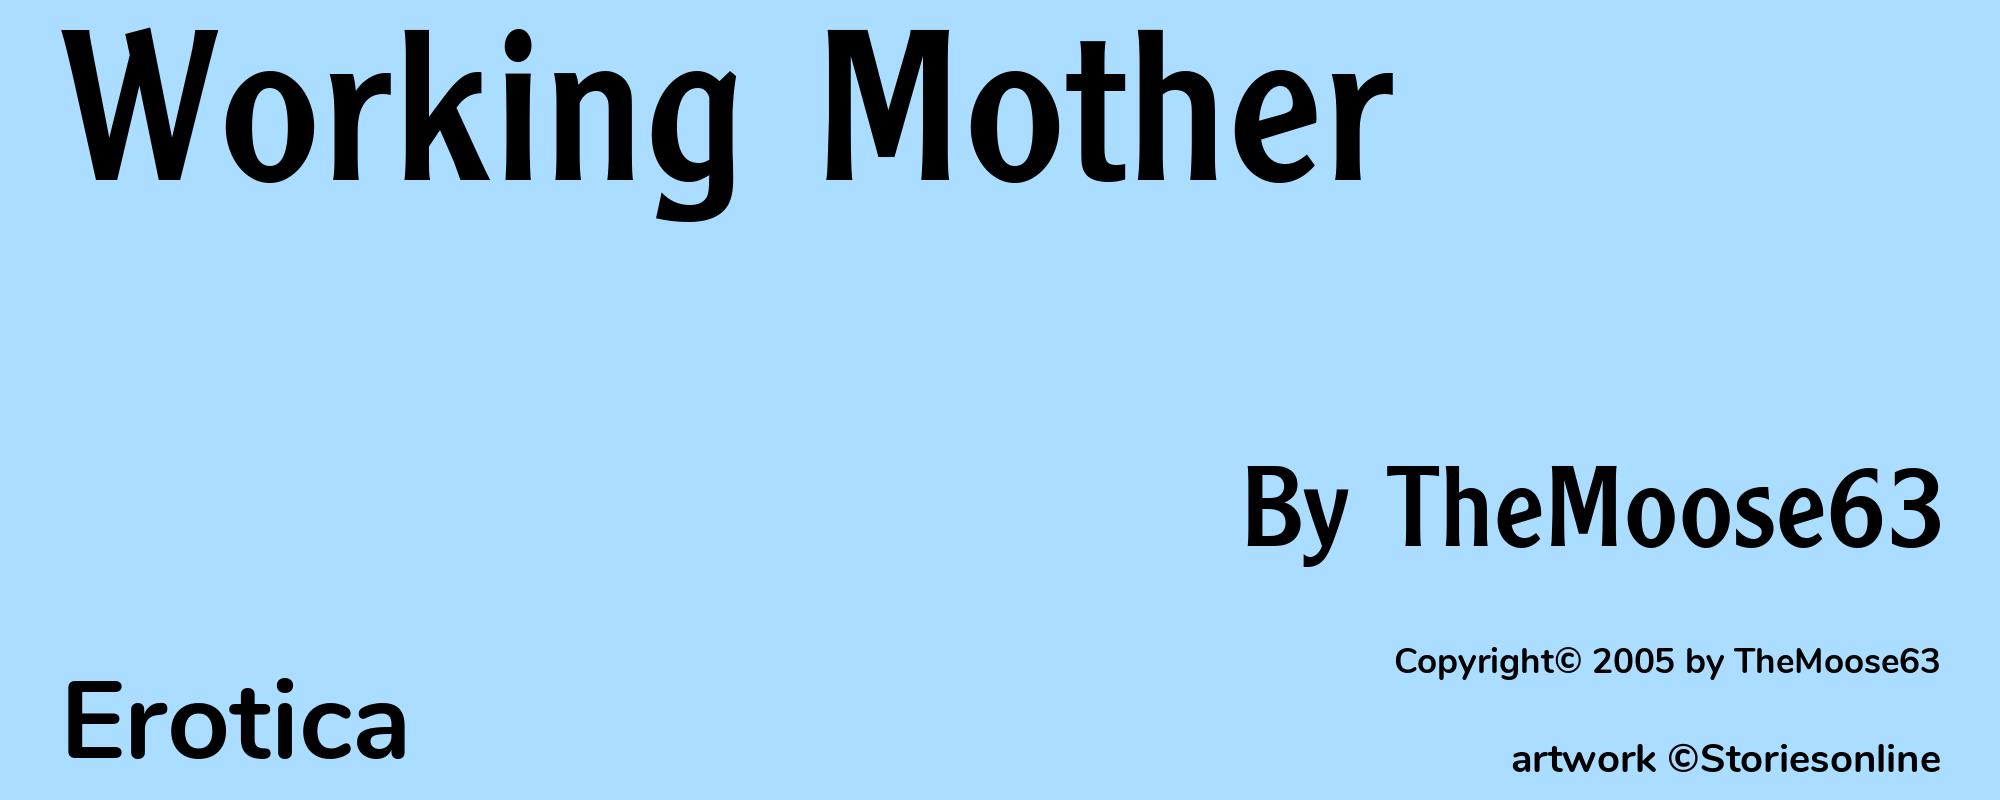 Working Mother - Cover